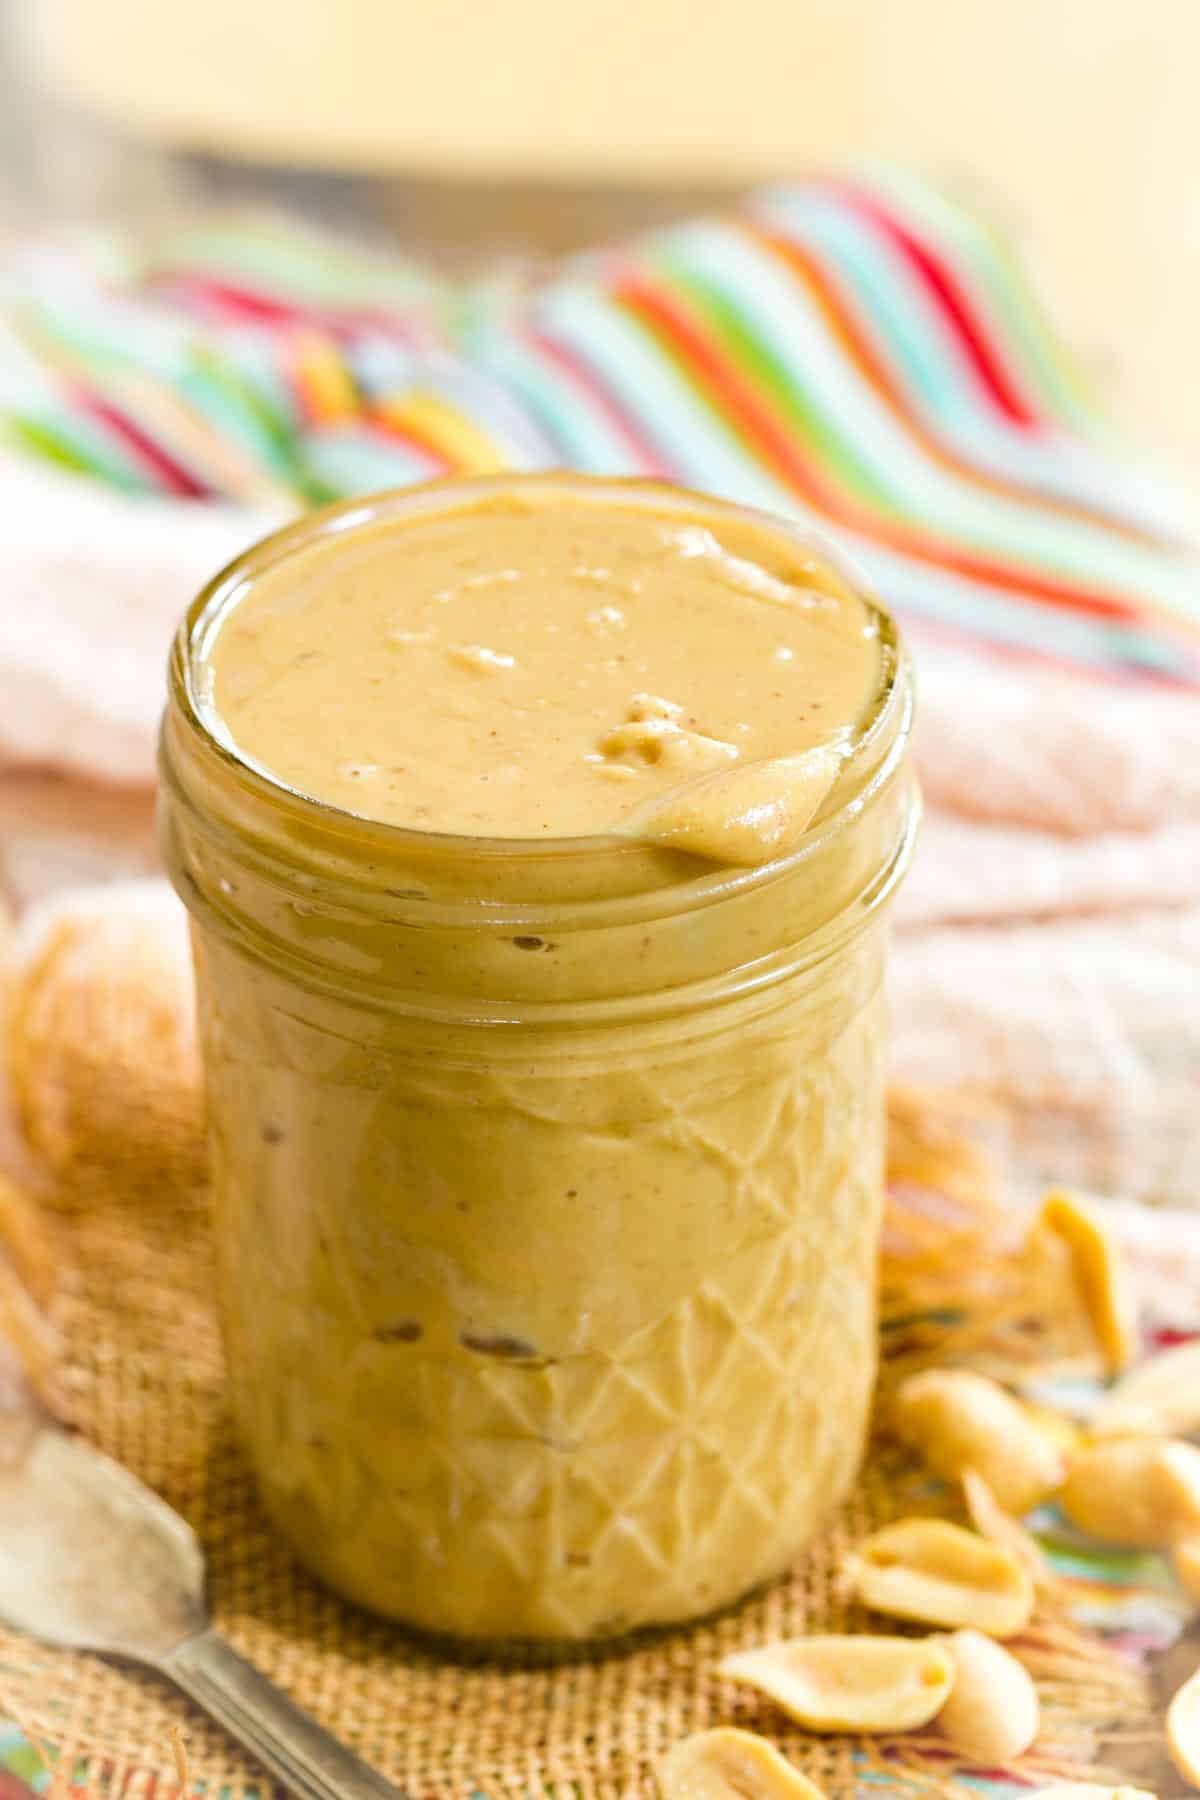 A jar of homemade peanut butter is shown with colorful towels in the background.